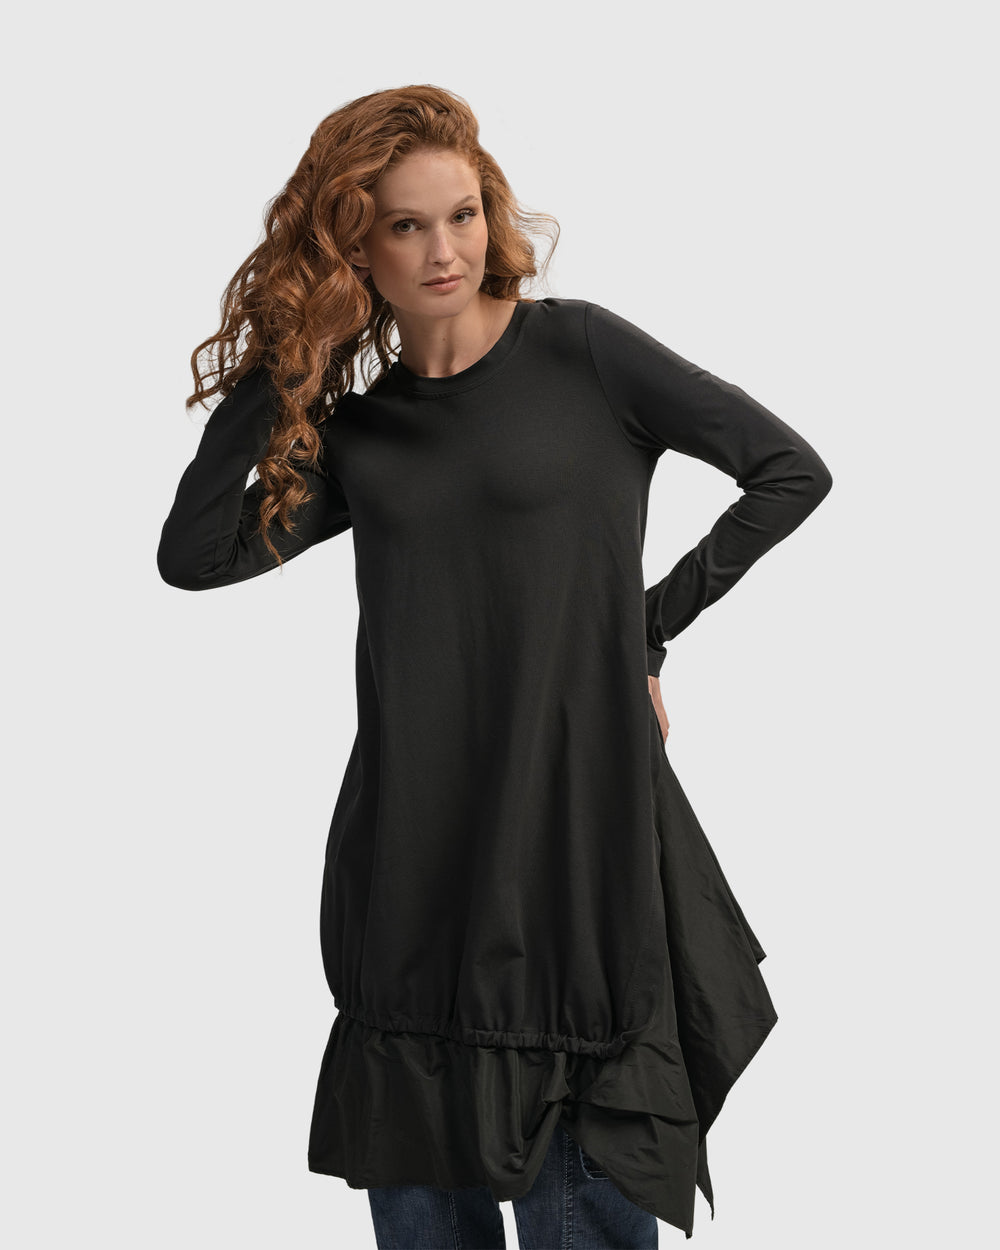 A woman wearing an ALEMBIKA Urban New Wave Tunic Top, Black with long sleeves and nylon skirting.